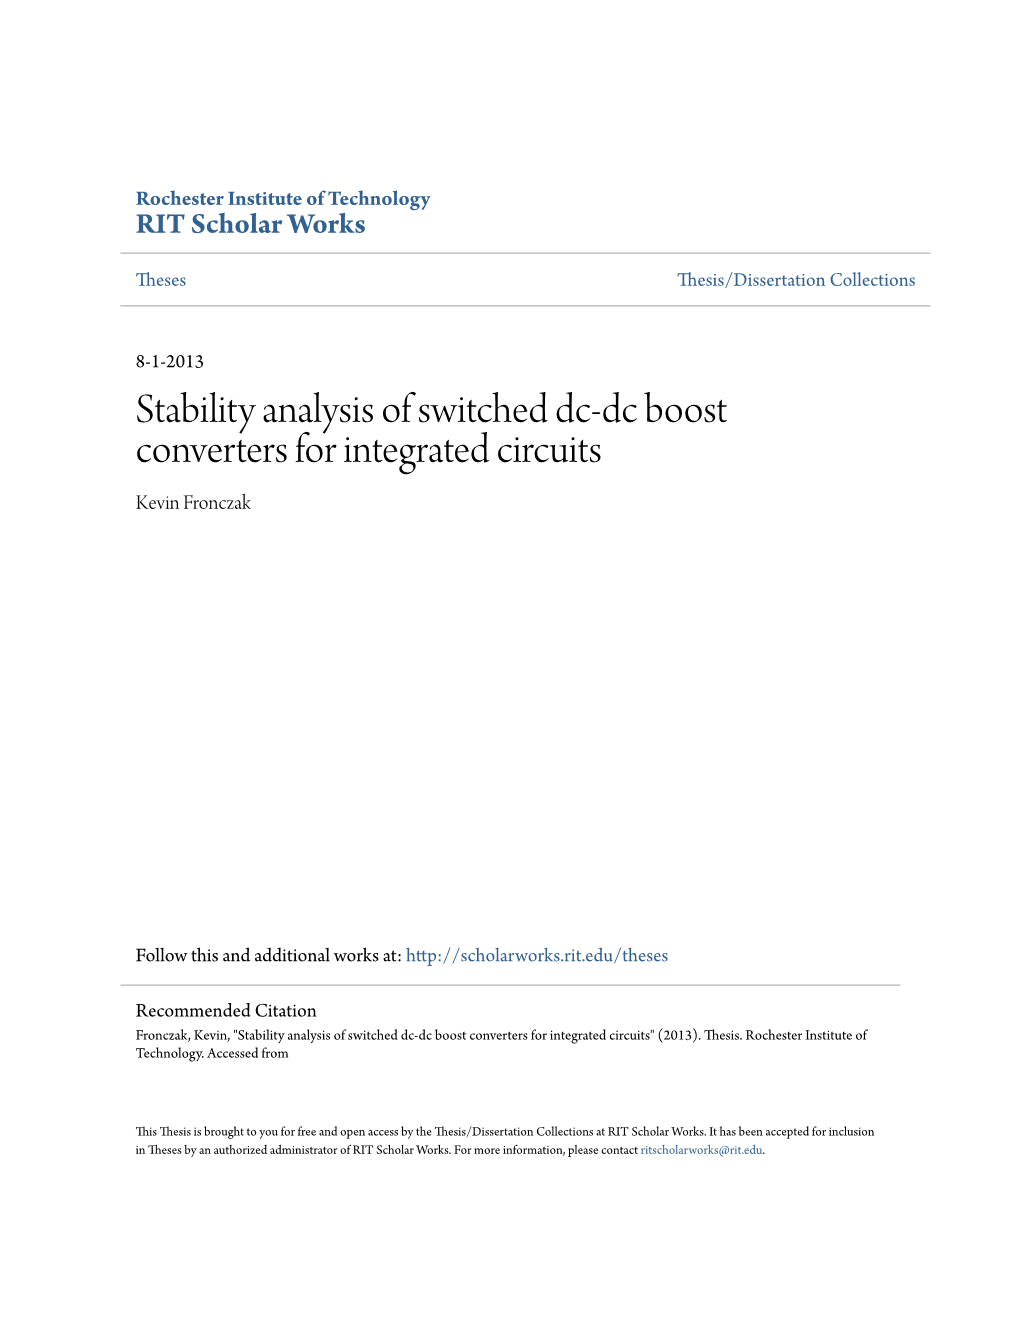 Stability Analysis of Switched Dc-Dc Boost Converters for Integrated Circuits Kevin Fronczak